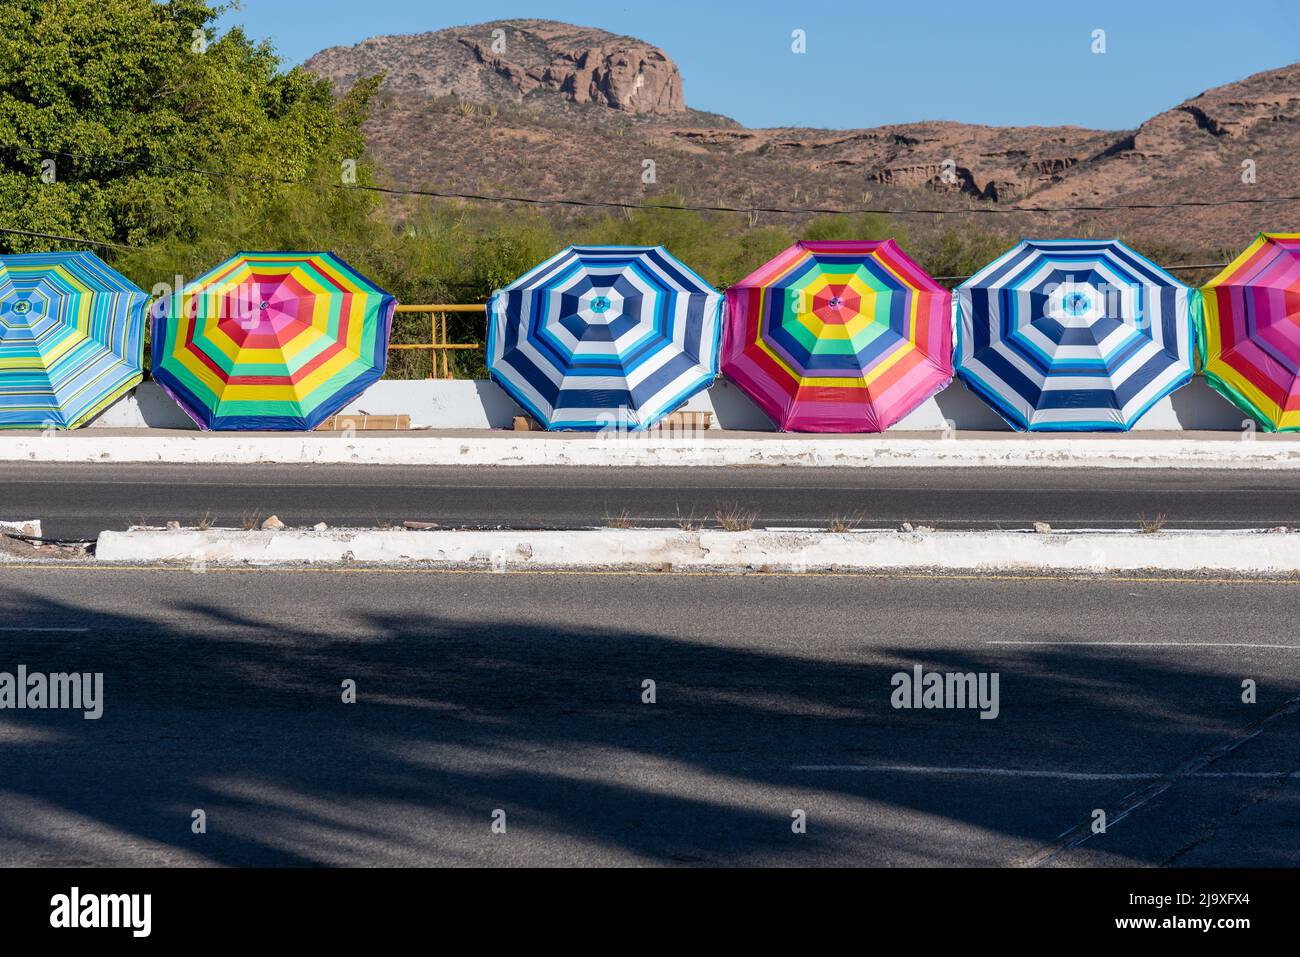 A long line of large colorful striped sun umbrellas for sale displayed open on a sidewalk, in the desert in San Carlos, Sonora, Mexico. Stock Photo